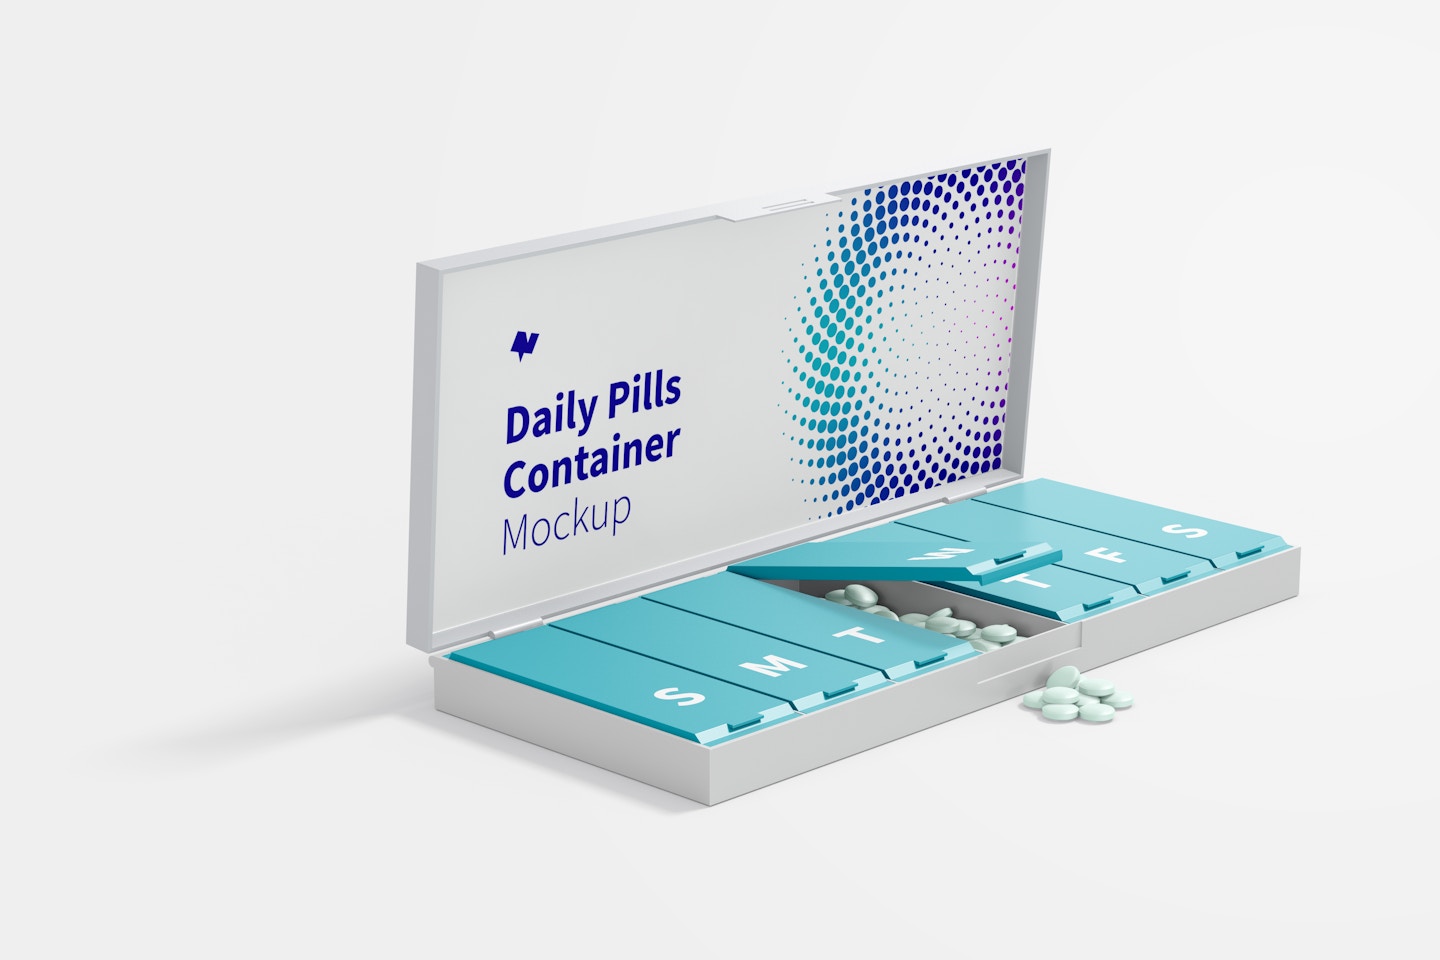 Daily Pills Container Mockup